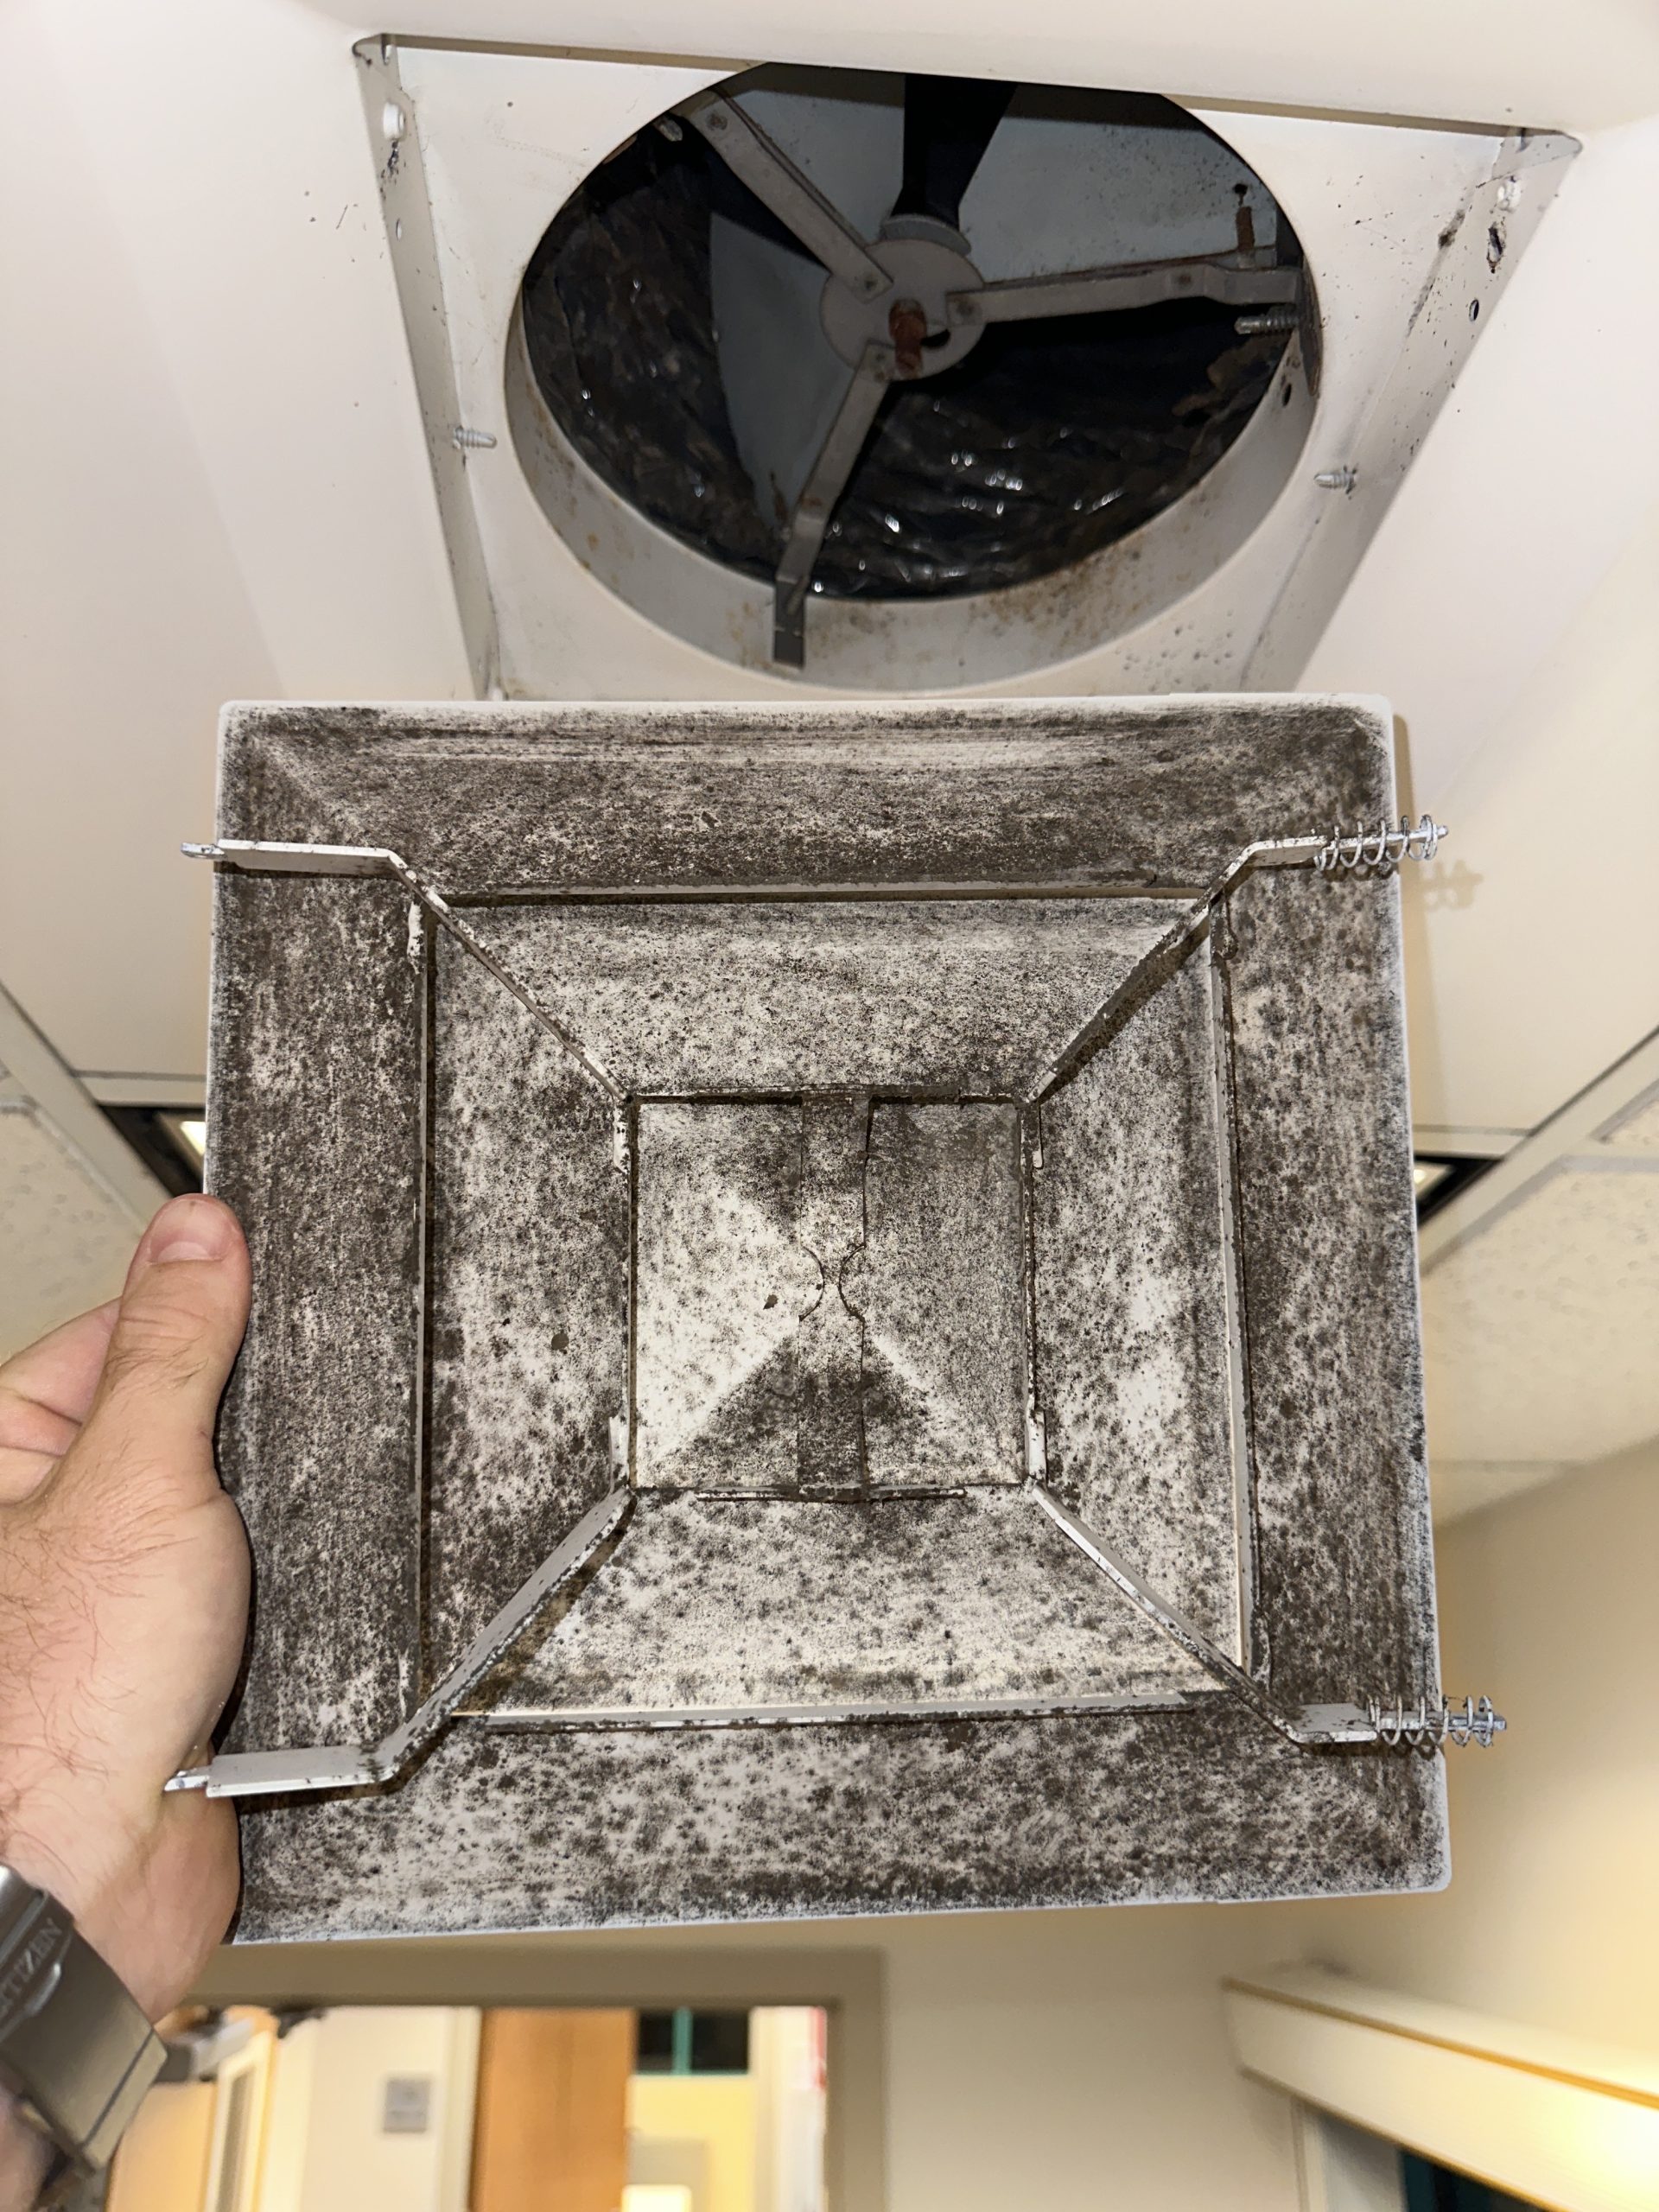 Mold on a duct